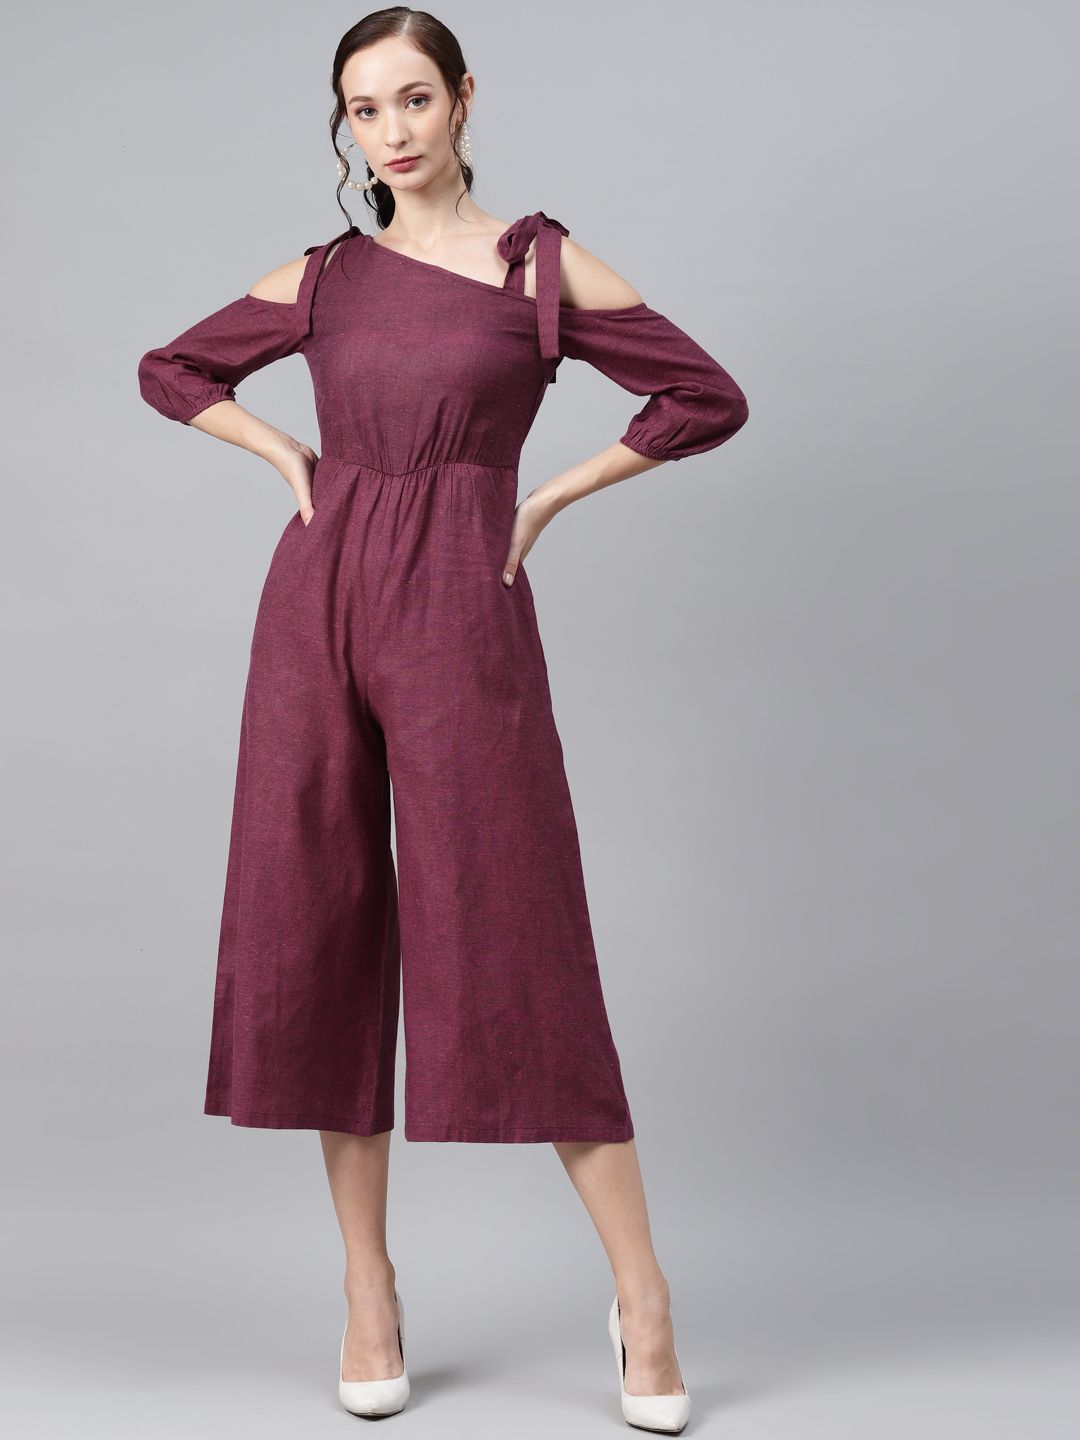 Cottinfab Burgundy Solid Gathered Culotte Jumpsuit Price in India